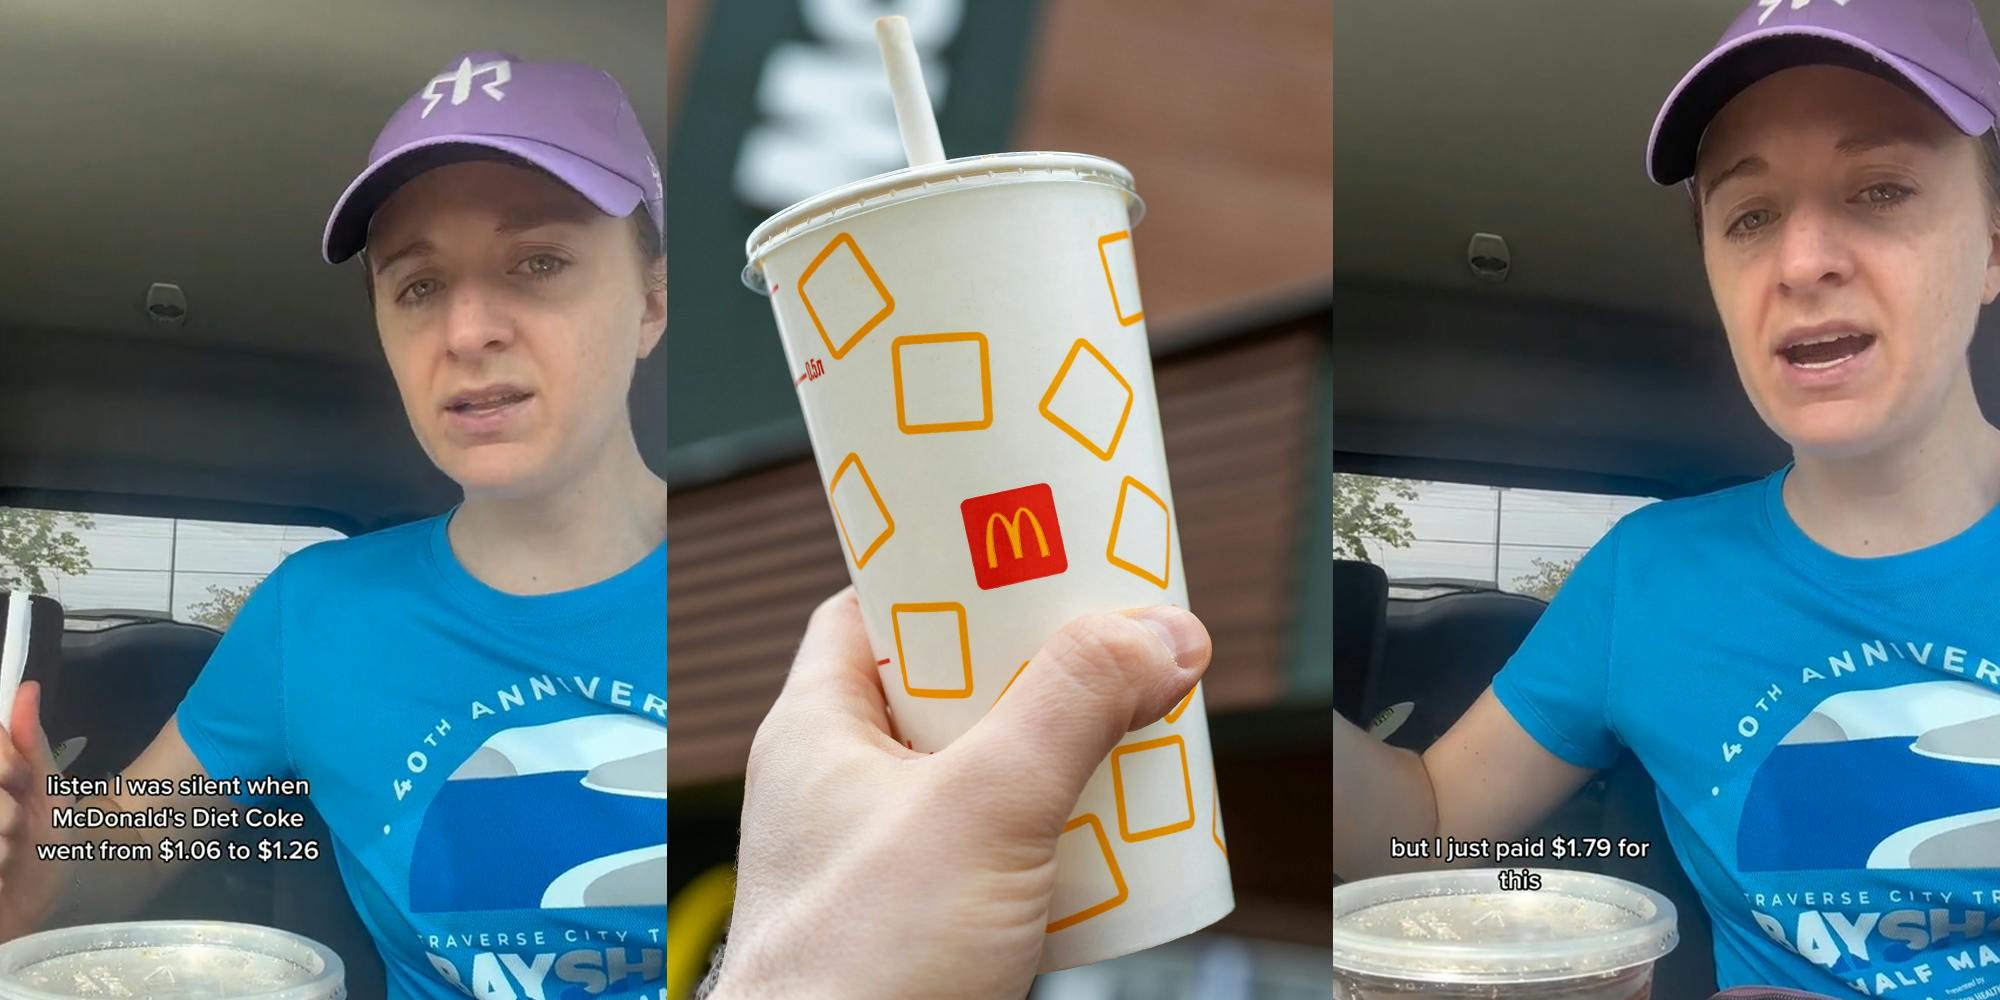 McDonald's customer speaking in car with caption "listen I was silent when McDonald's Diet Coke went from $1.06 to $1.26" (l) McDonald's drink in hand in (c) McDonald's customer speaking in car with caption "but I just paid $1.79 for this" (r)